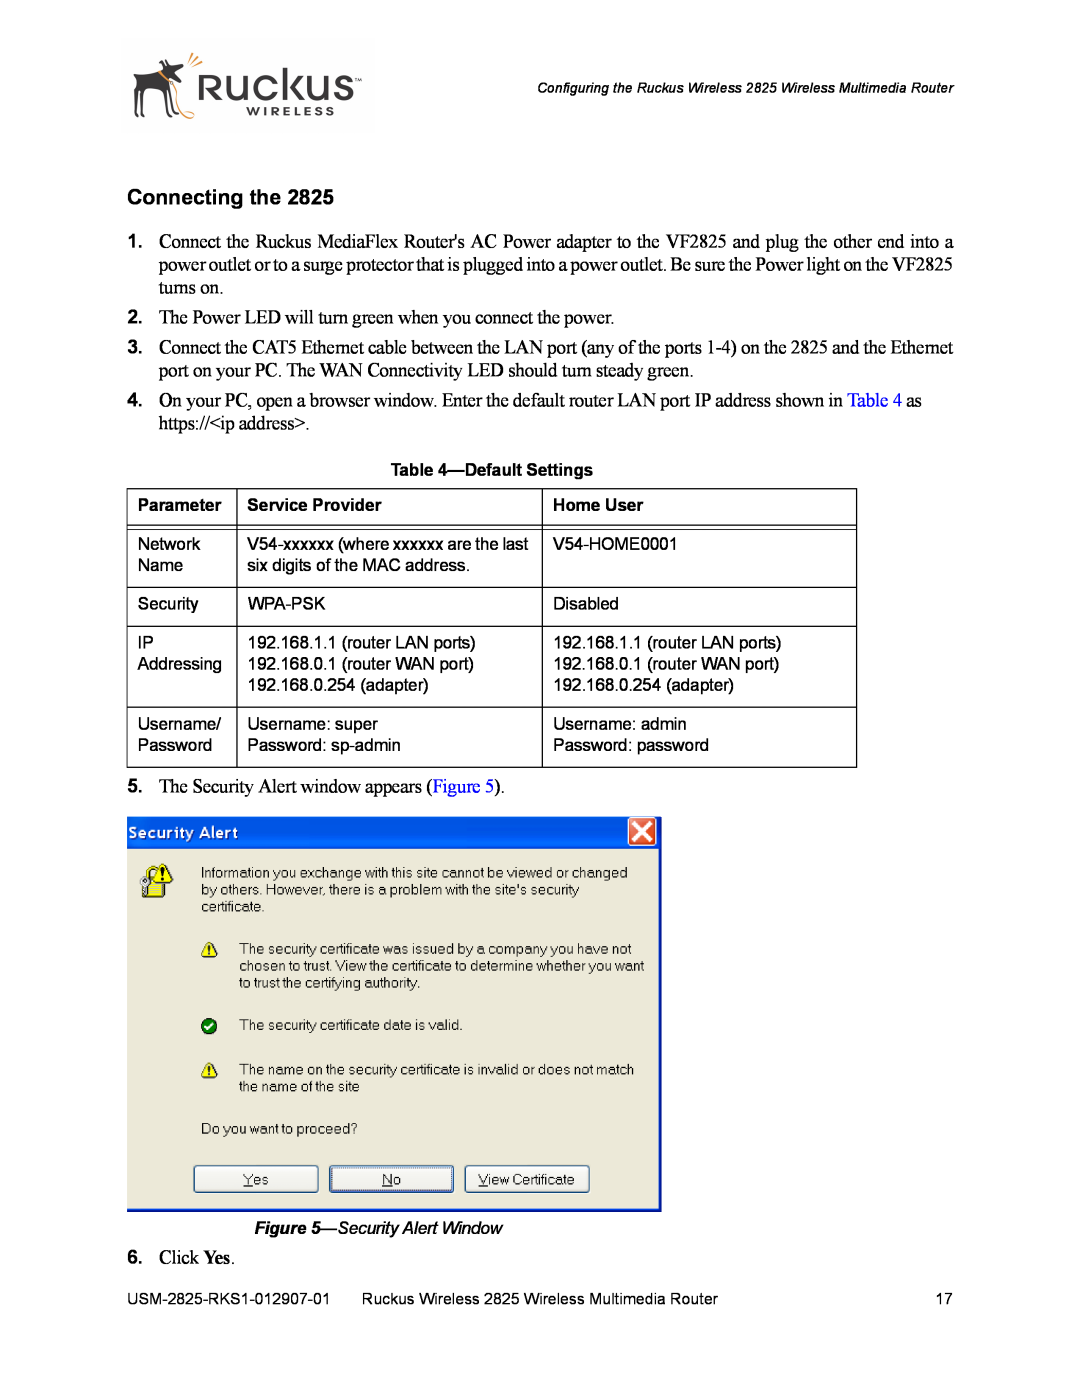 Ruckus Wireless 2111, 2825 manual Connecting the 